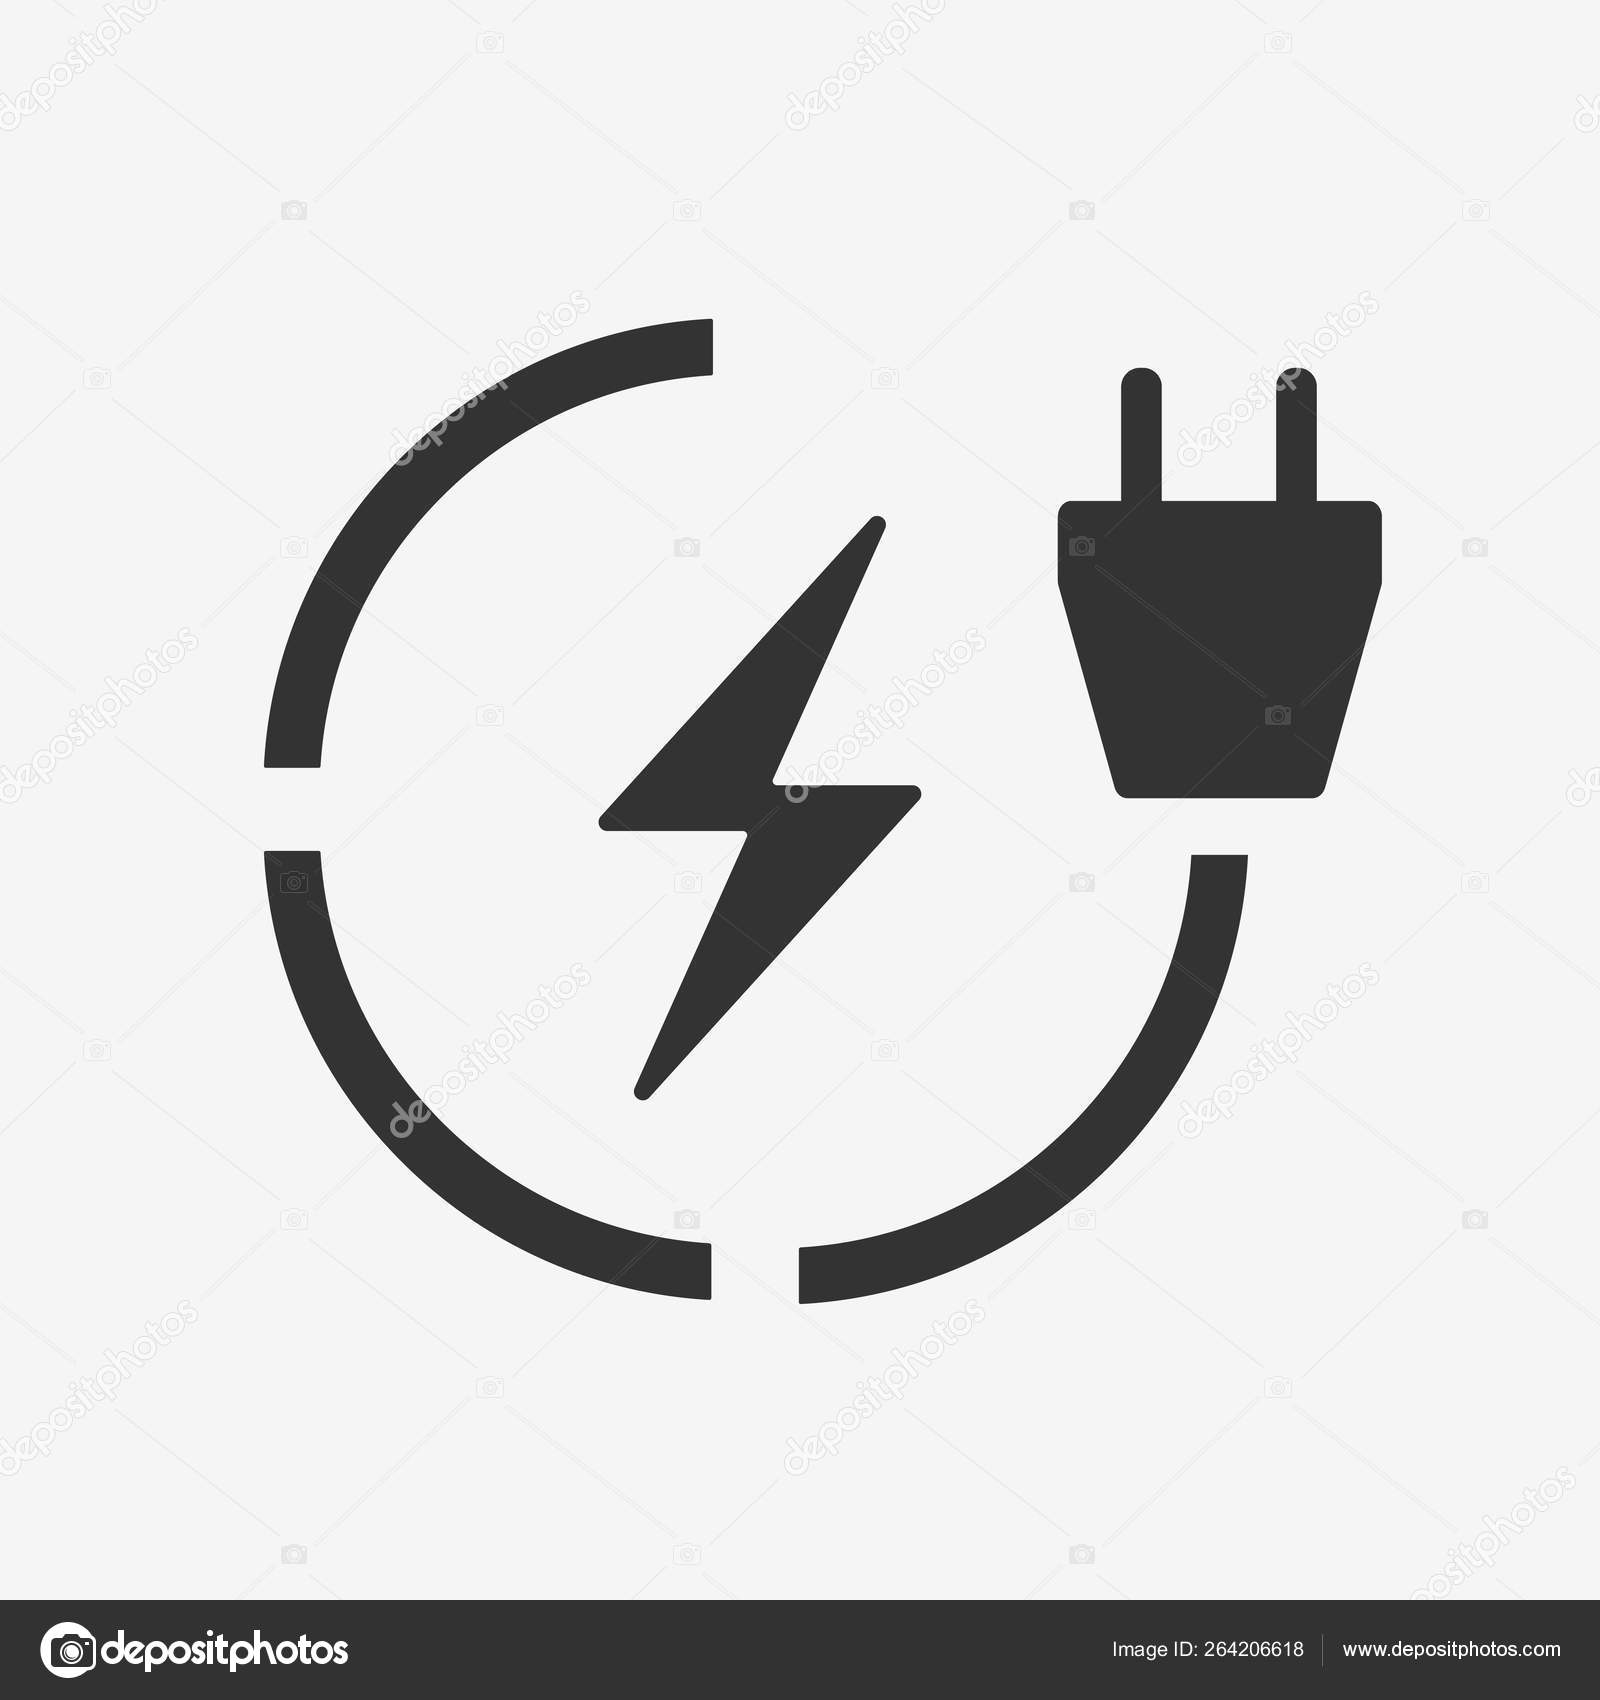 Electric Car Charging Station Flat Icon Electro Power Vehicle Charge Symbol Stock Vector C Bestforbest 264206618,Romantic Dinners For Two